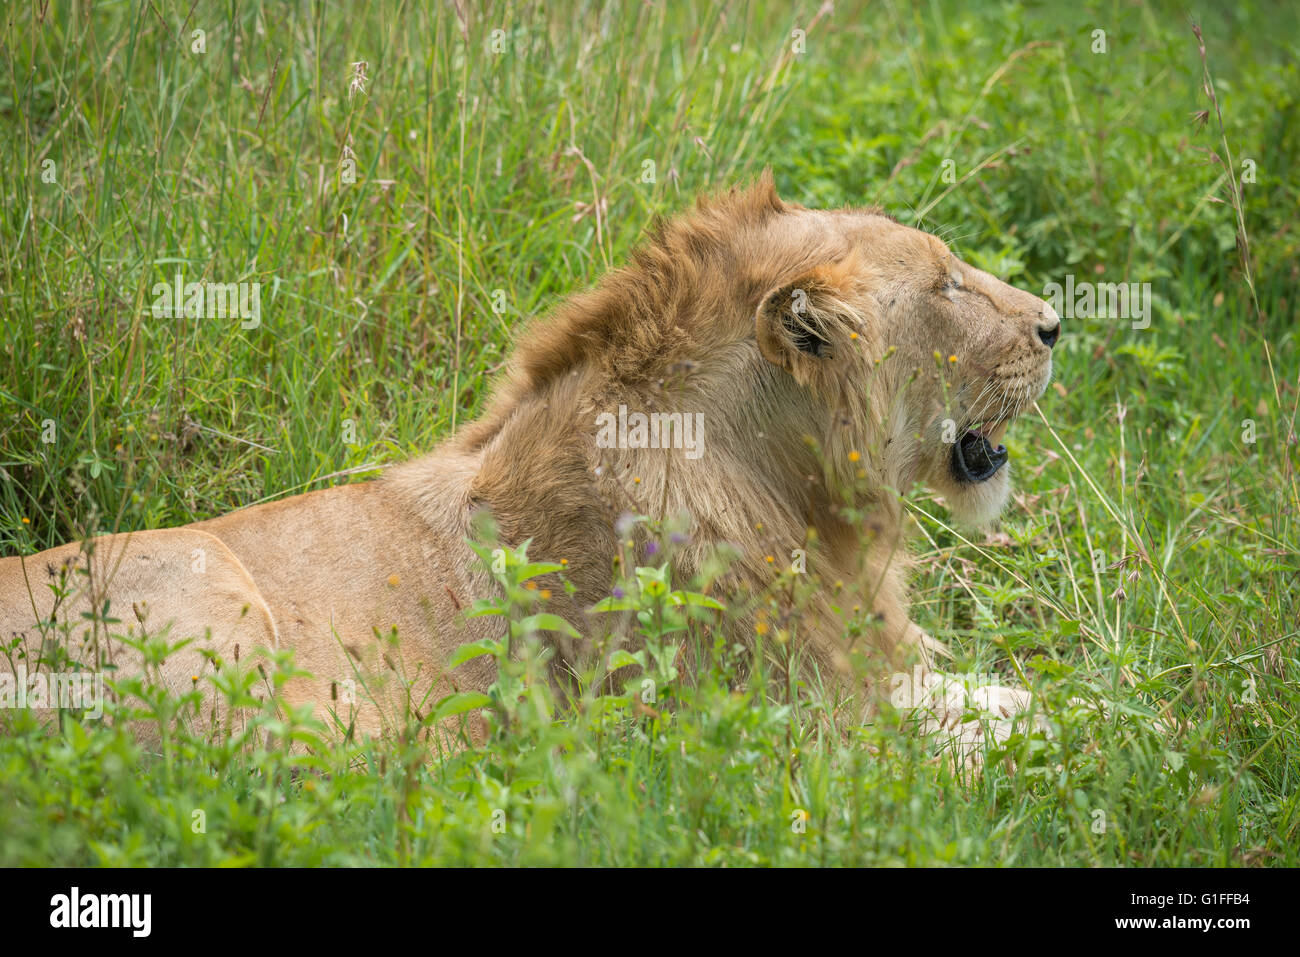 A young male Lion resting in the fertile grassland of the Ngorongoro Conservation Area and Crater in Tanzania, East Africa Stock Photo